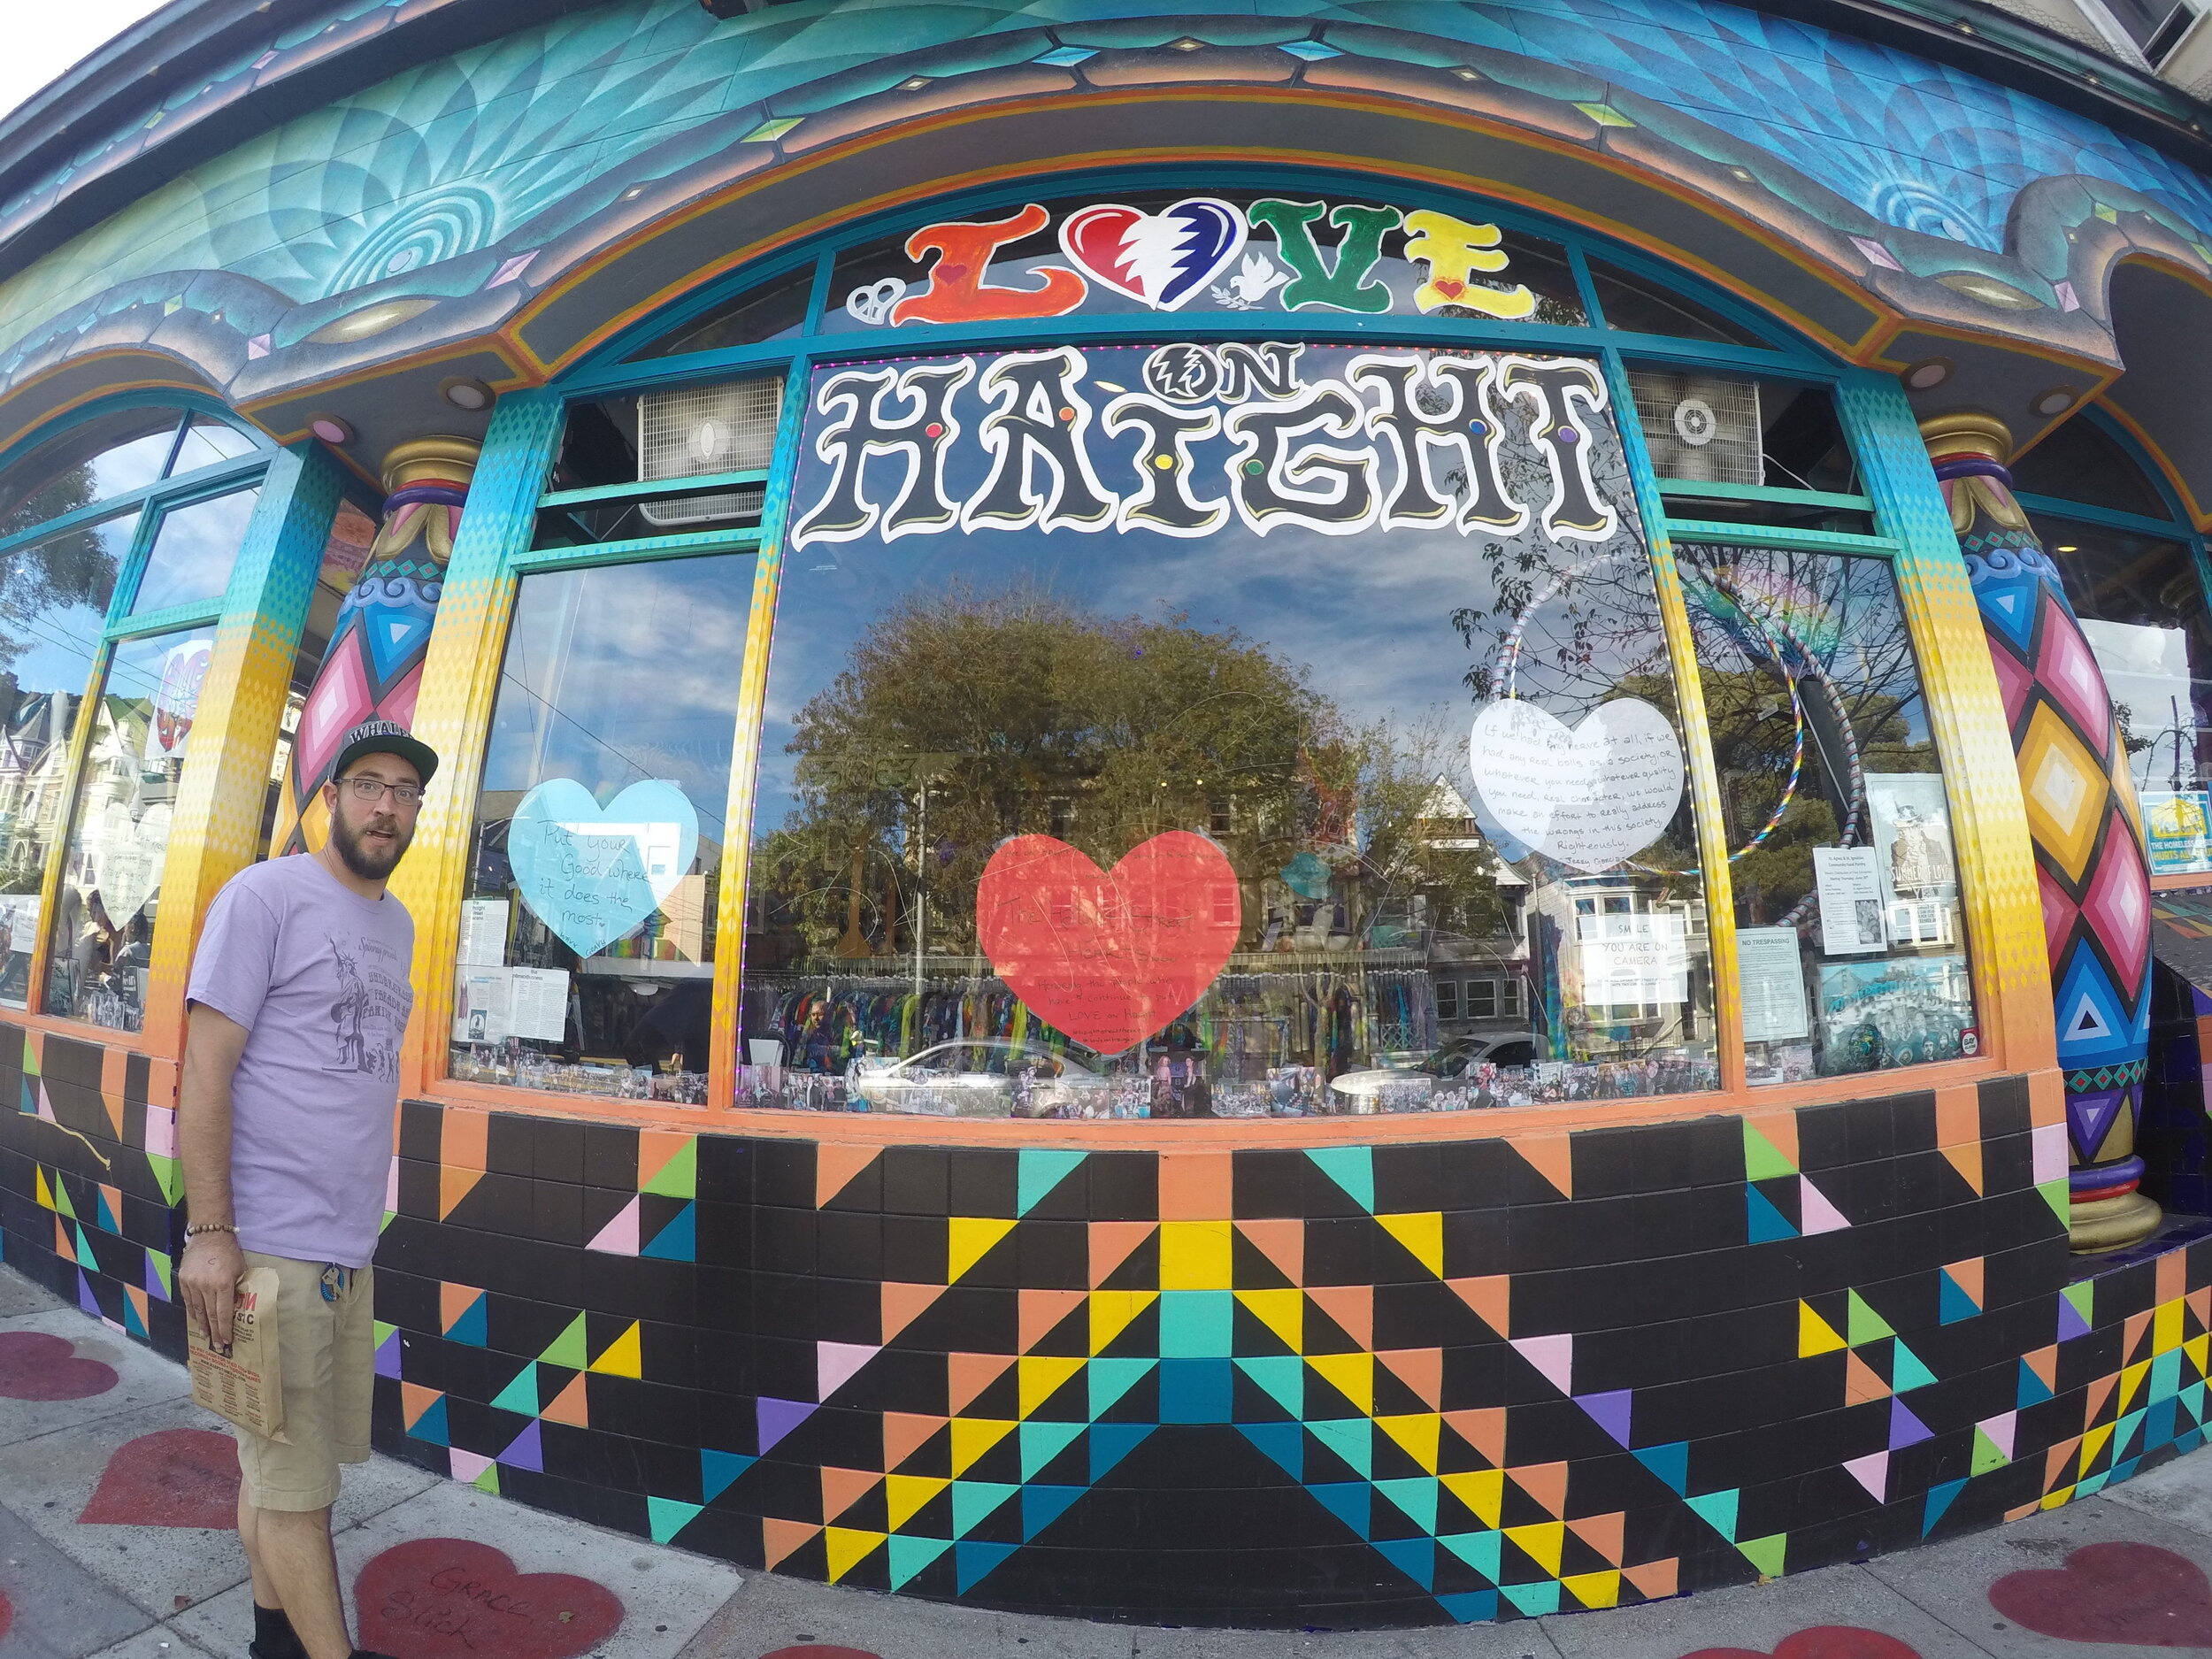 Tim posing with our favorite Haight Ashbury shop! Love on Haight is a brand that embodies everything we love and stand for - so getting to experience it's colorful presence on this famous street in San Francisco was pretty amazing!